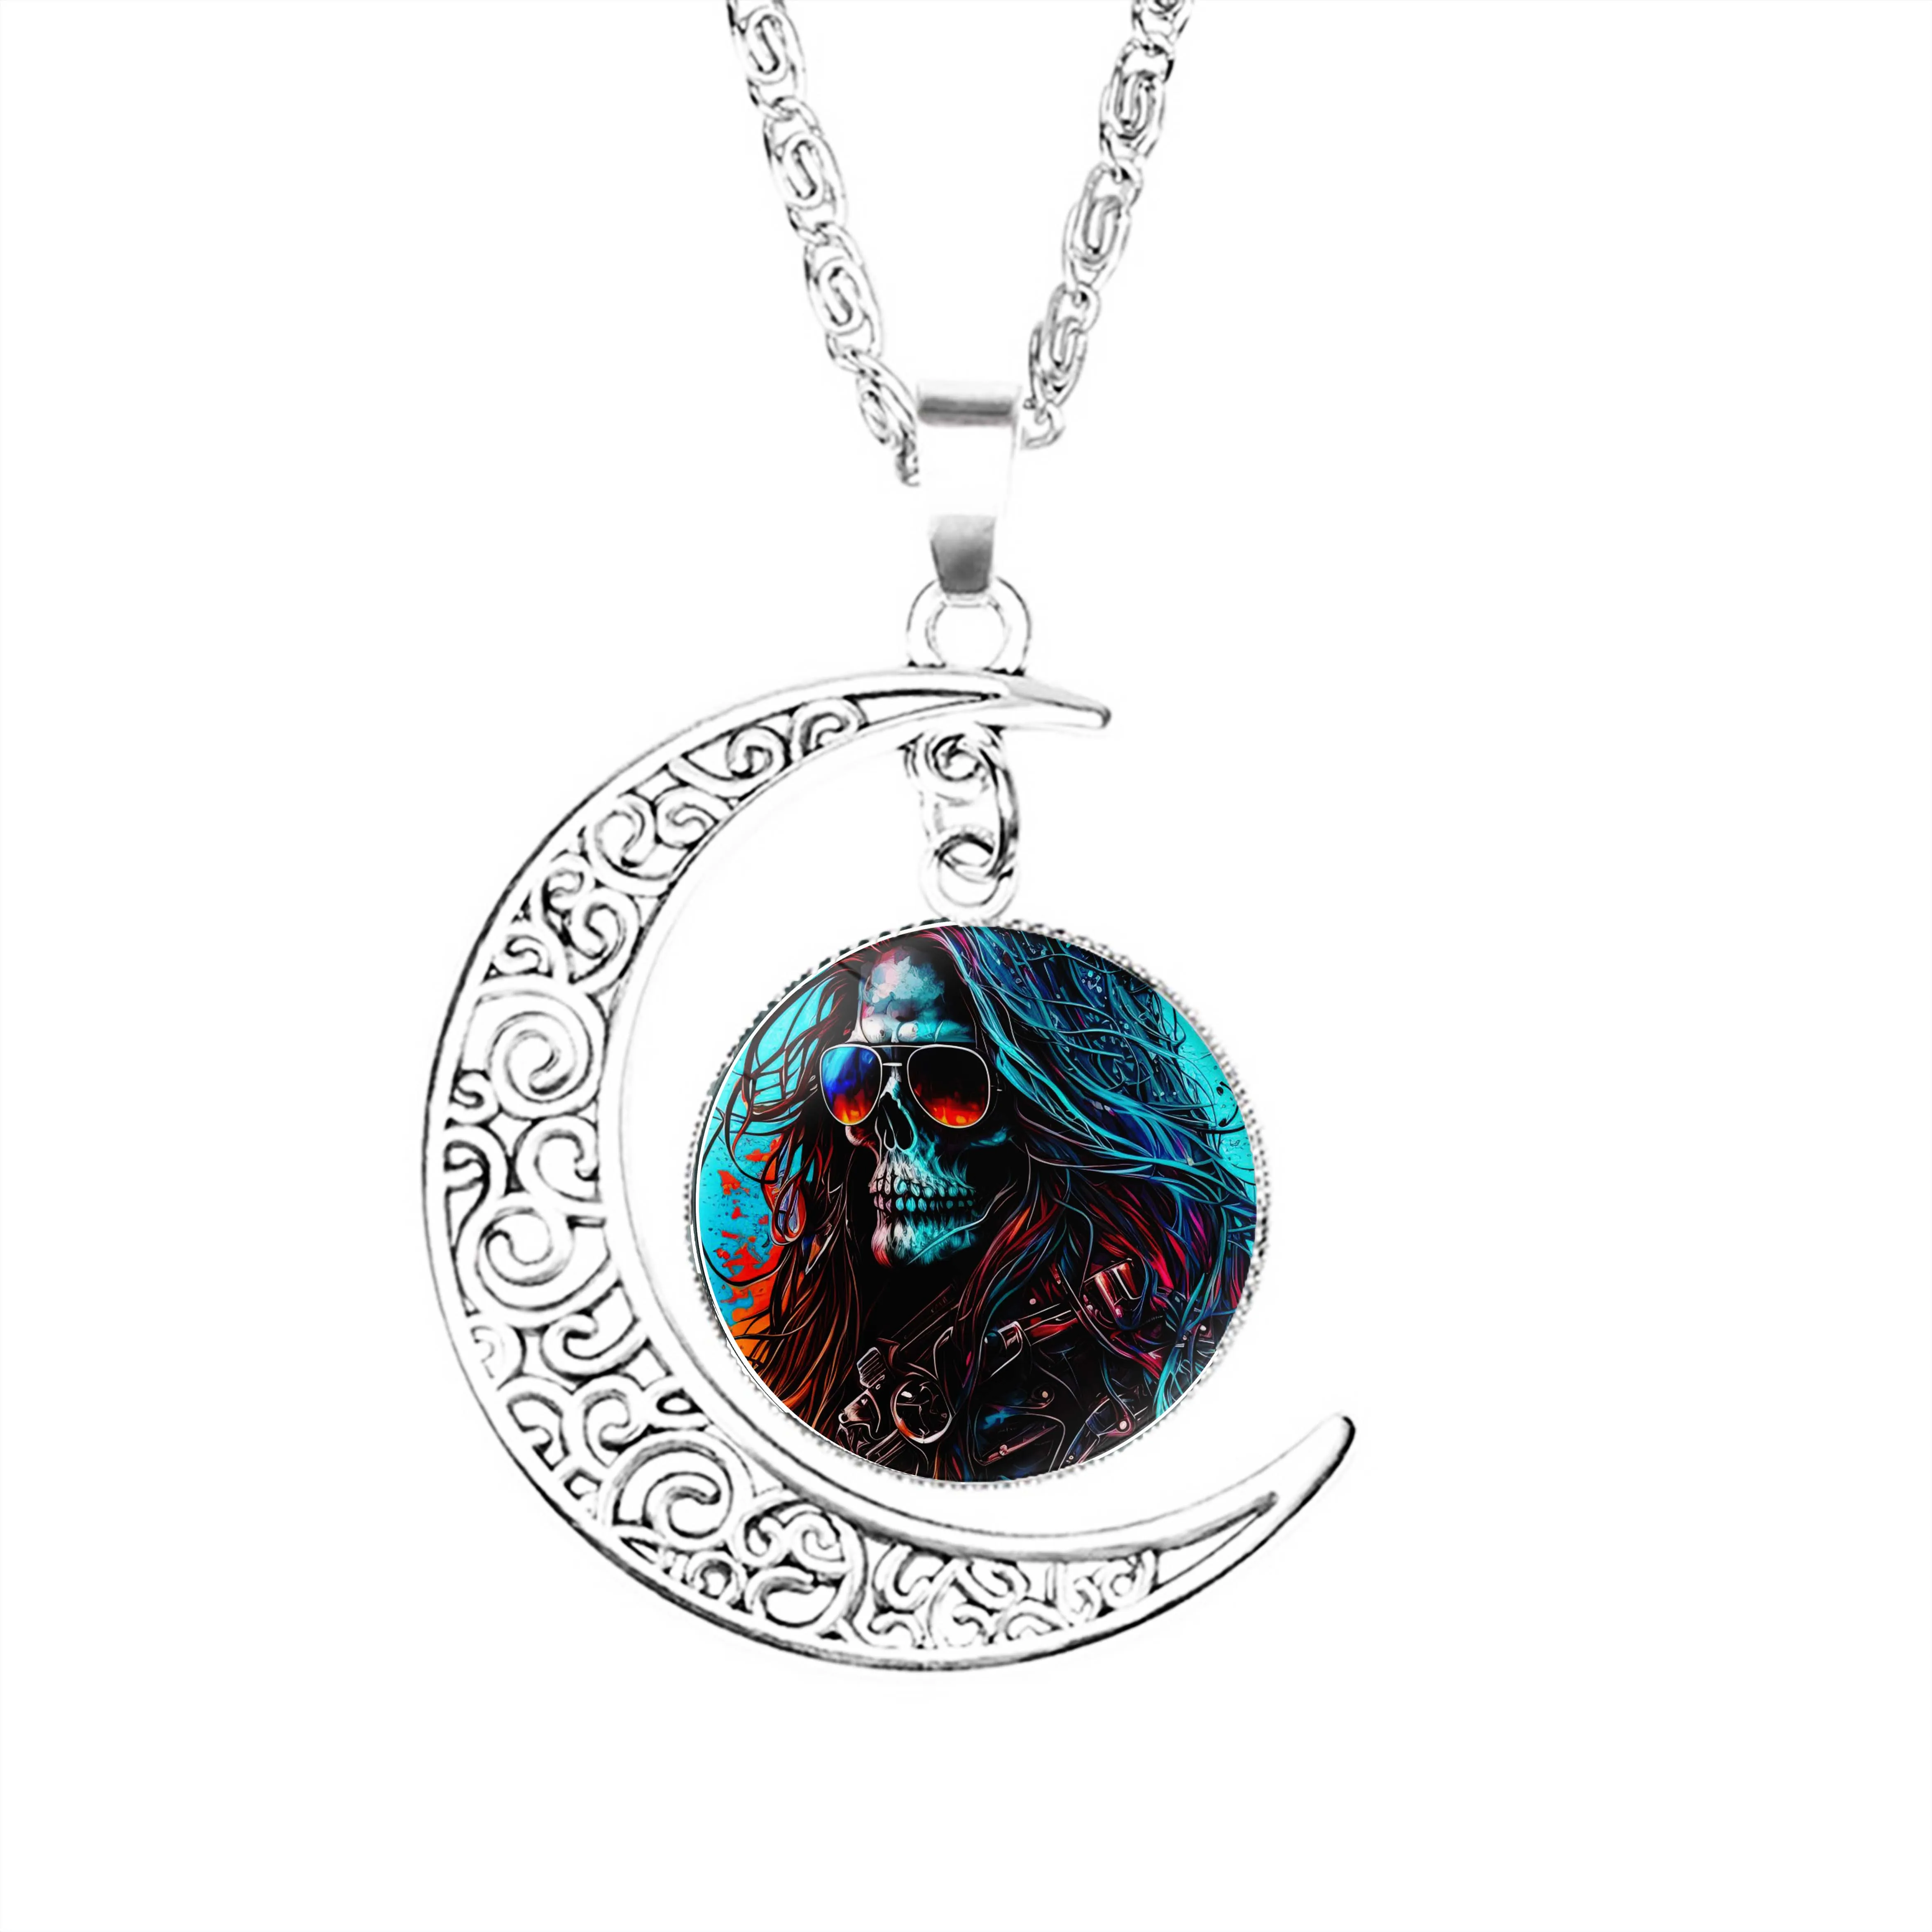 

Peace Skull Moon Necklace Men Women Jewelry Stainless Steel Fashion Gifts Charm Pendant Crescent Jewelry Glass Dome Boy Girls